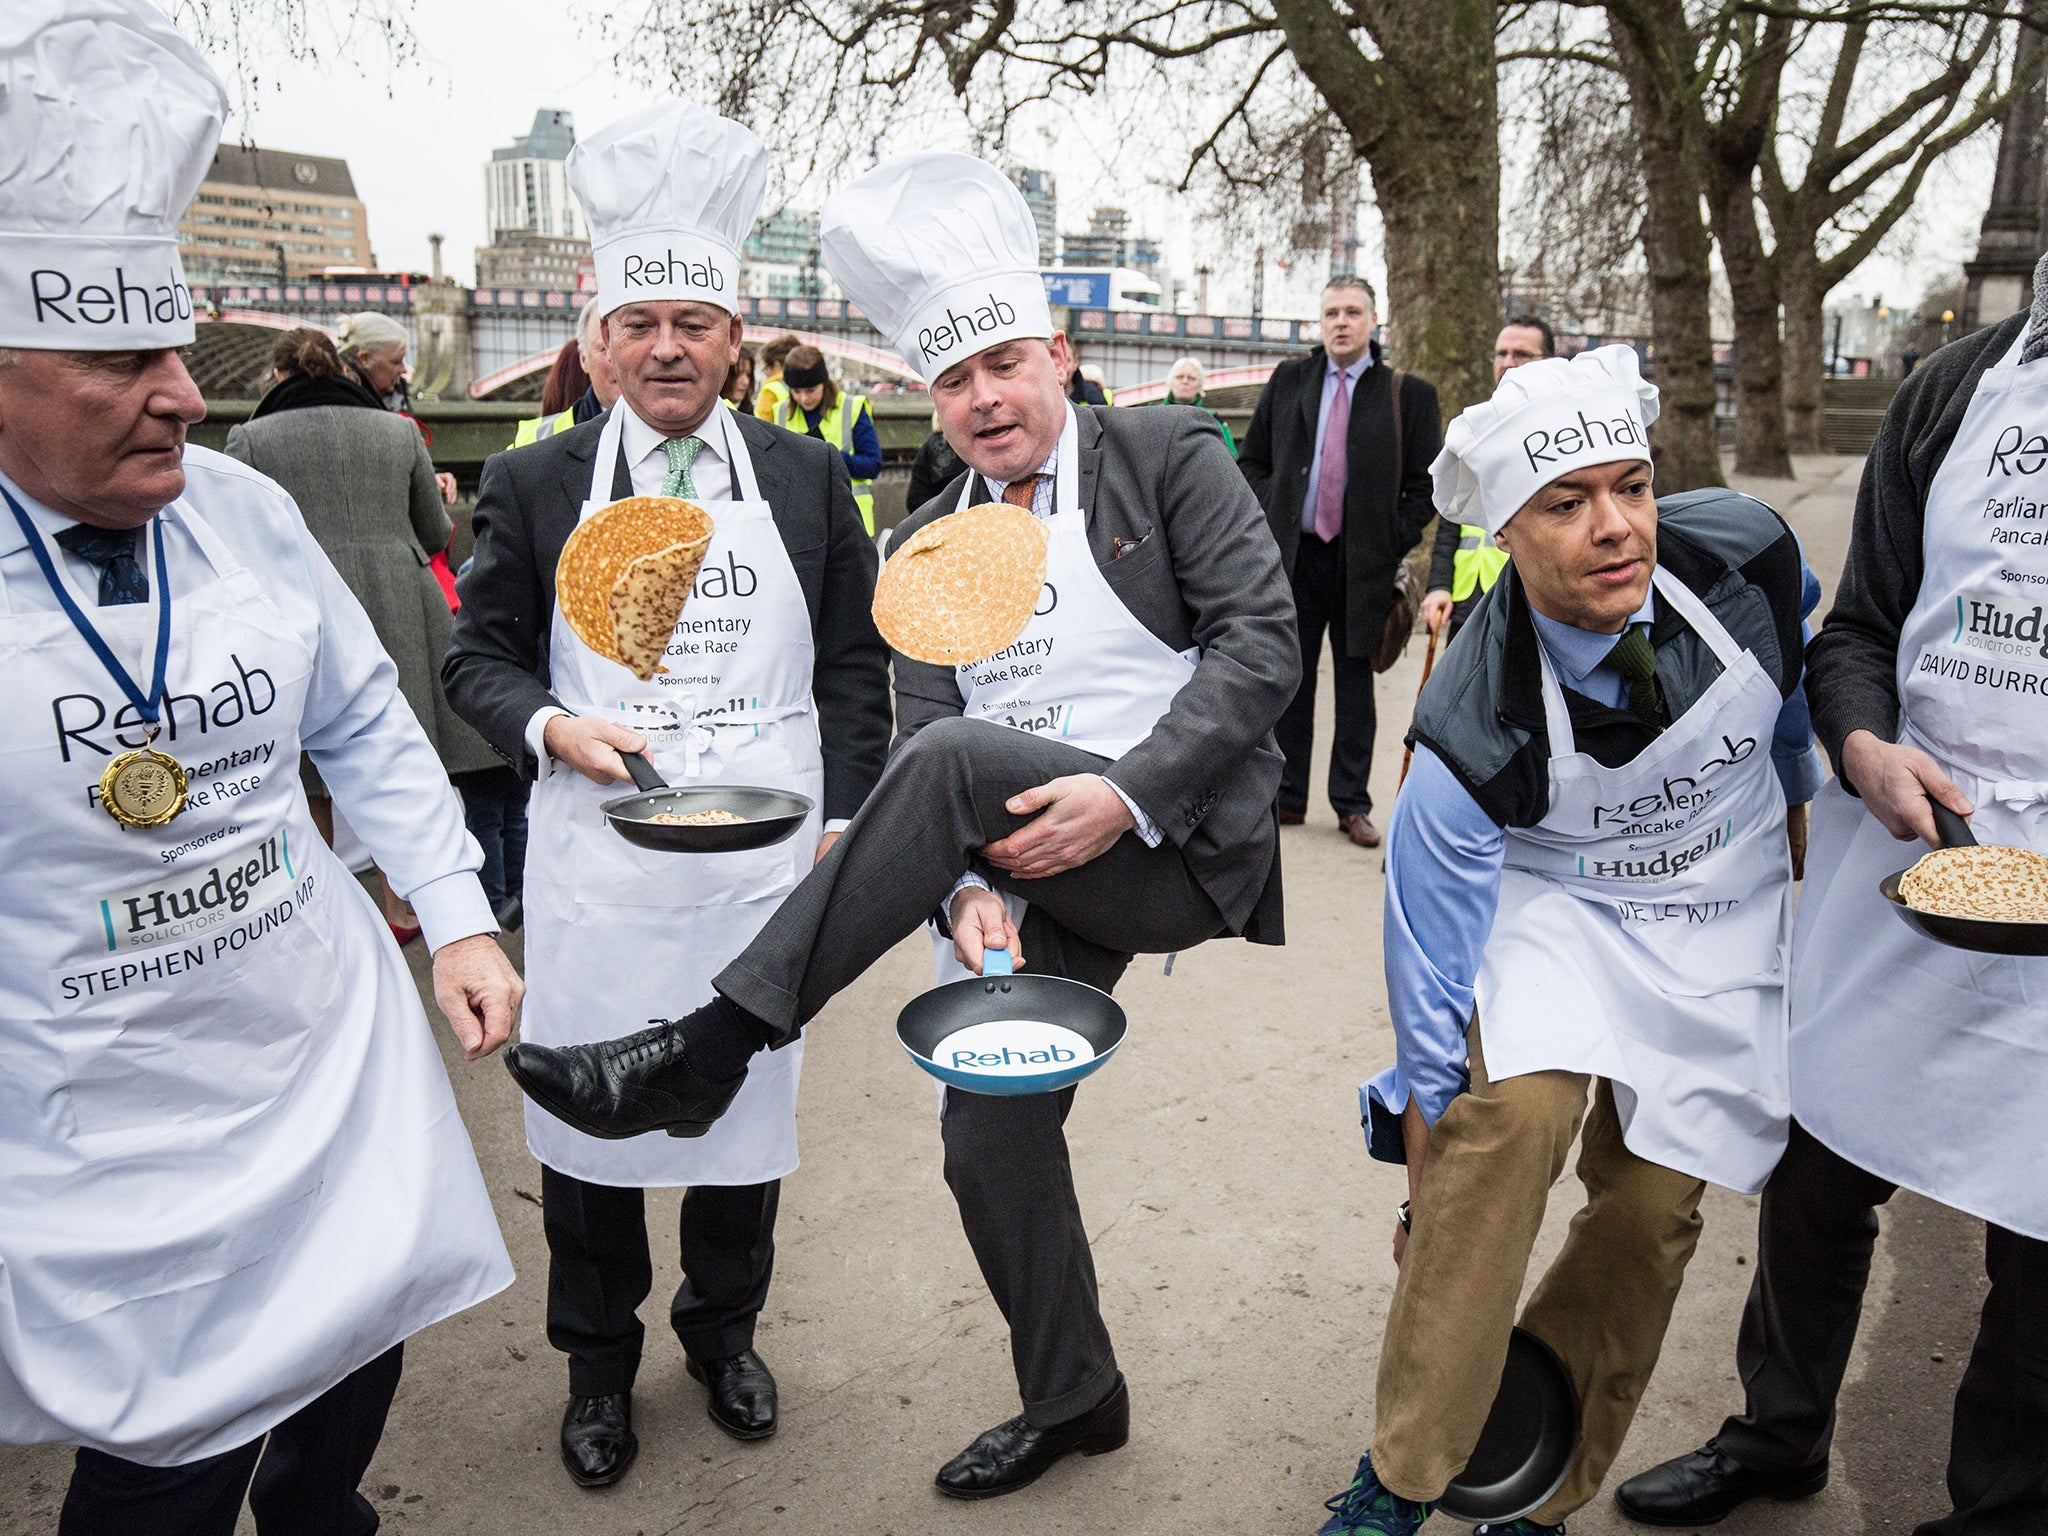 MPs take part in the Parliamentary Pancake Race